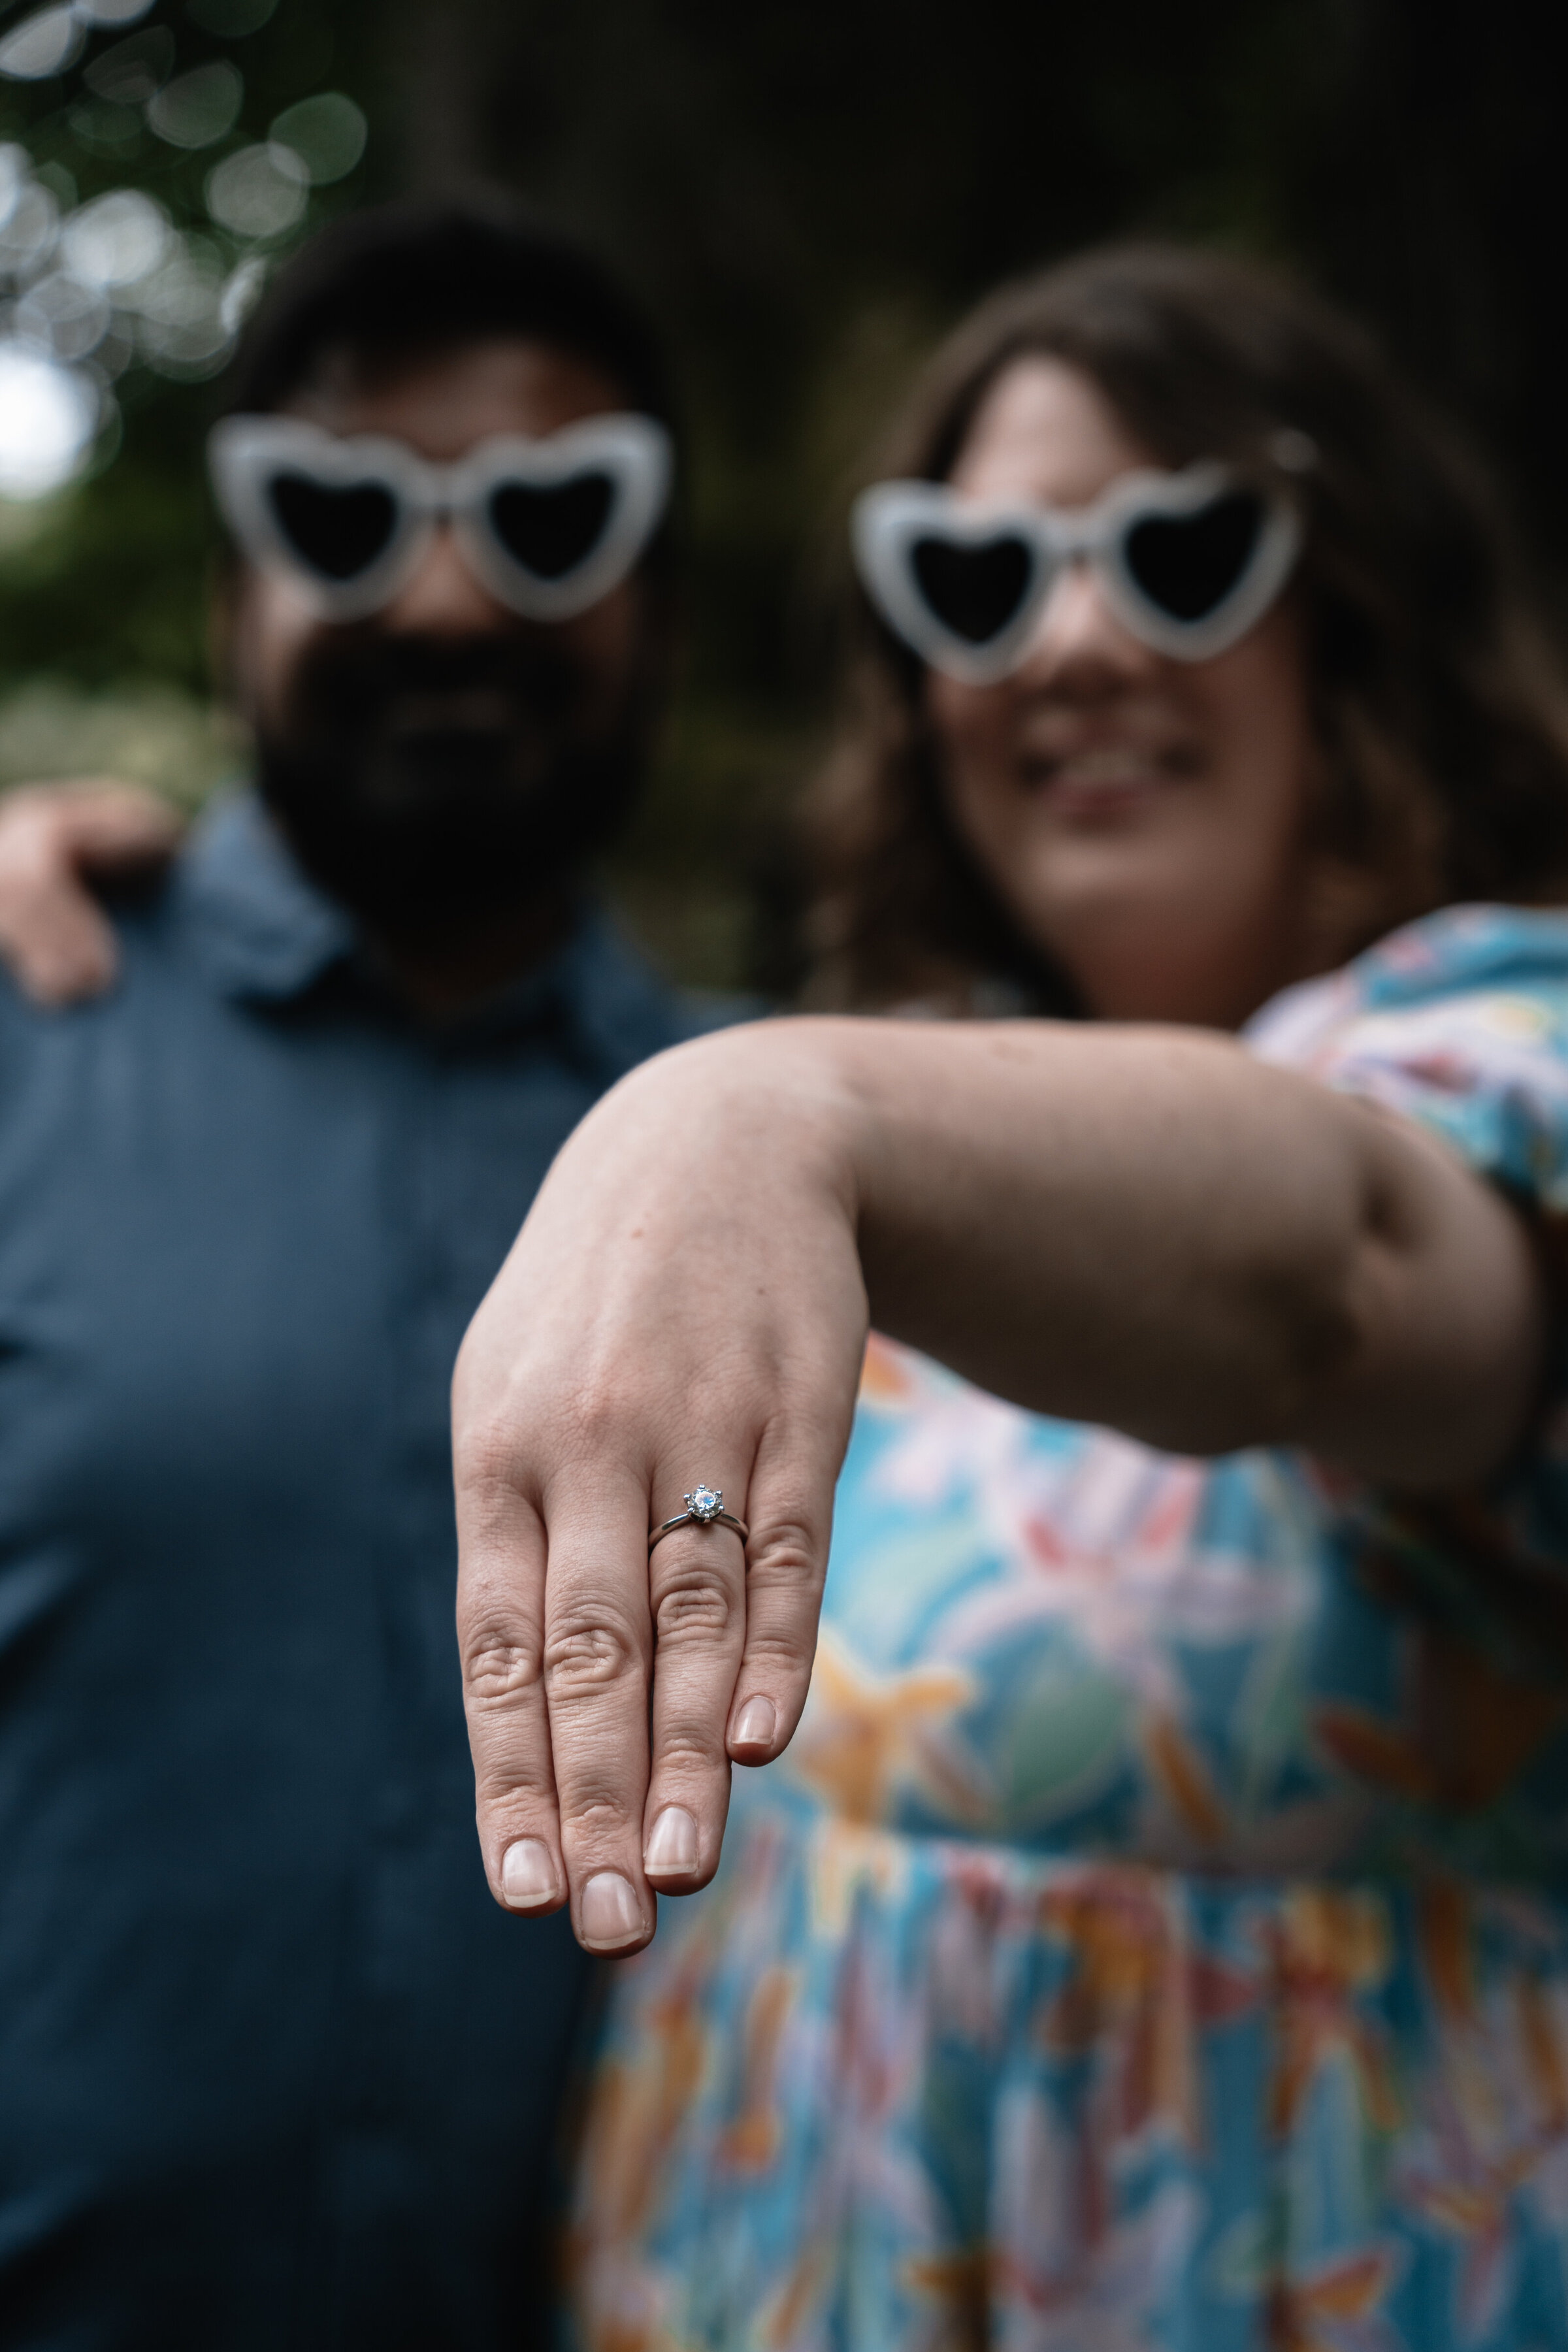 Close up of womans hand with engagement ring, in background couple are blurred but seen wearing heart shaped glasses